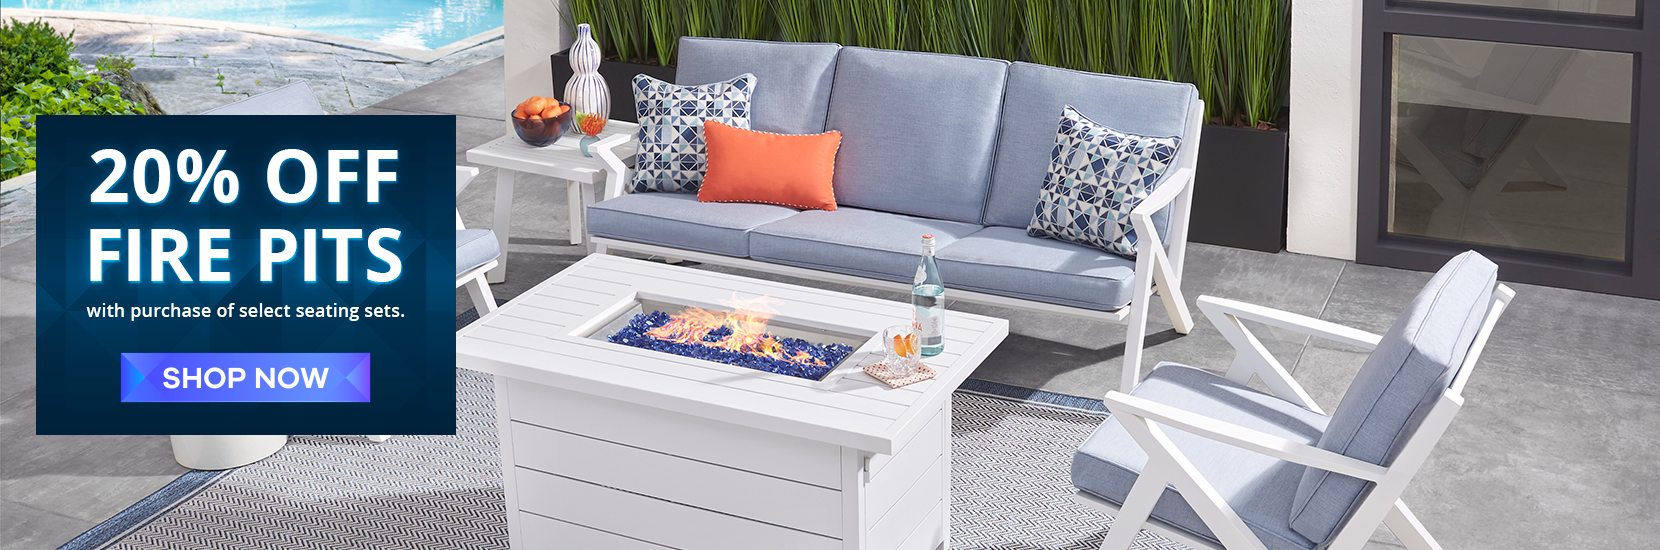 20% off fire pits with purchase of select seating sets. shop now